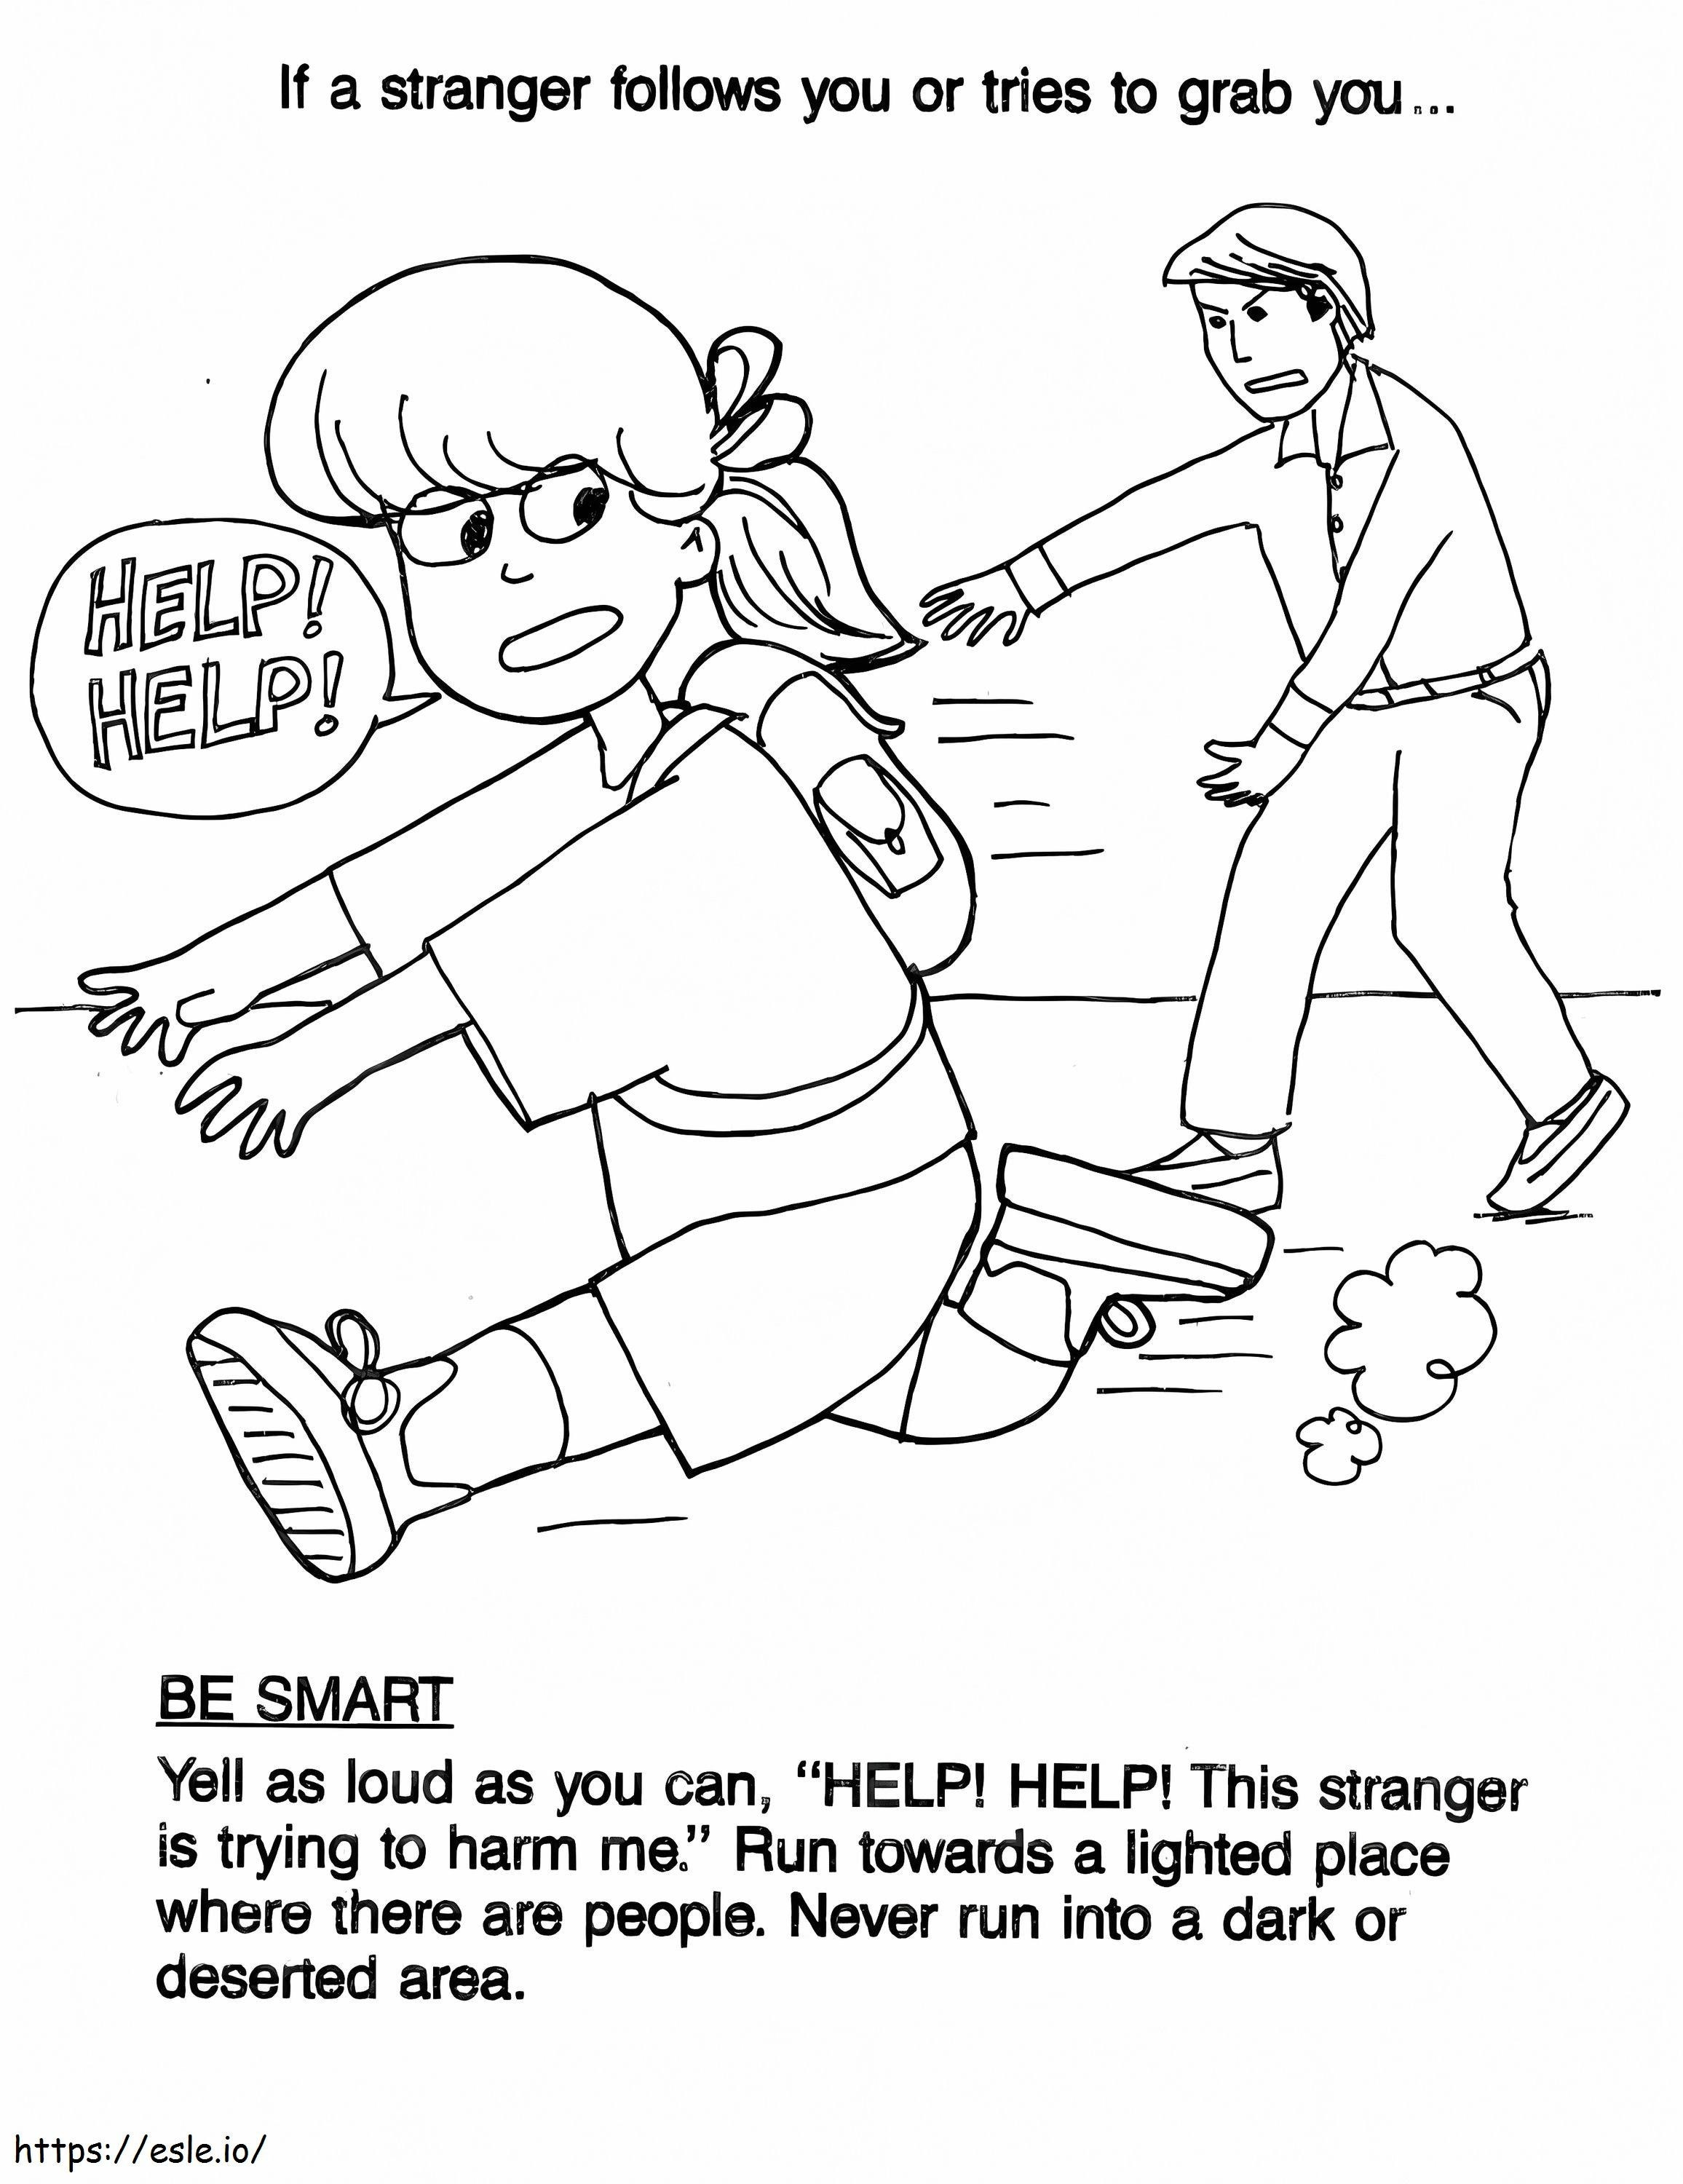 Child Safety To Print coloring page